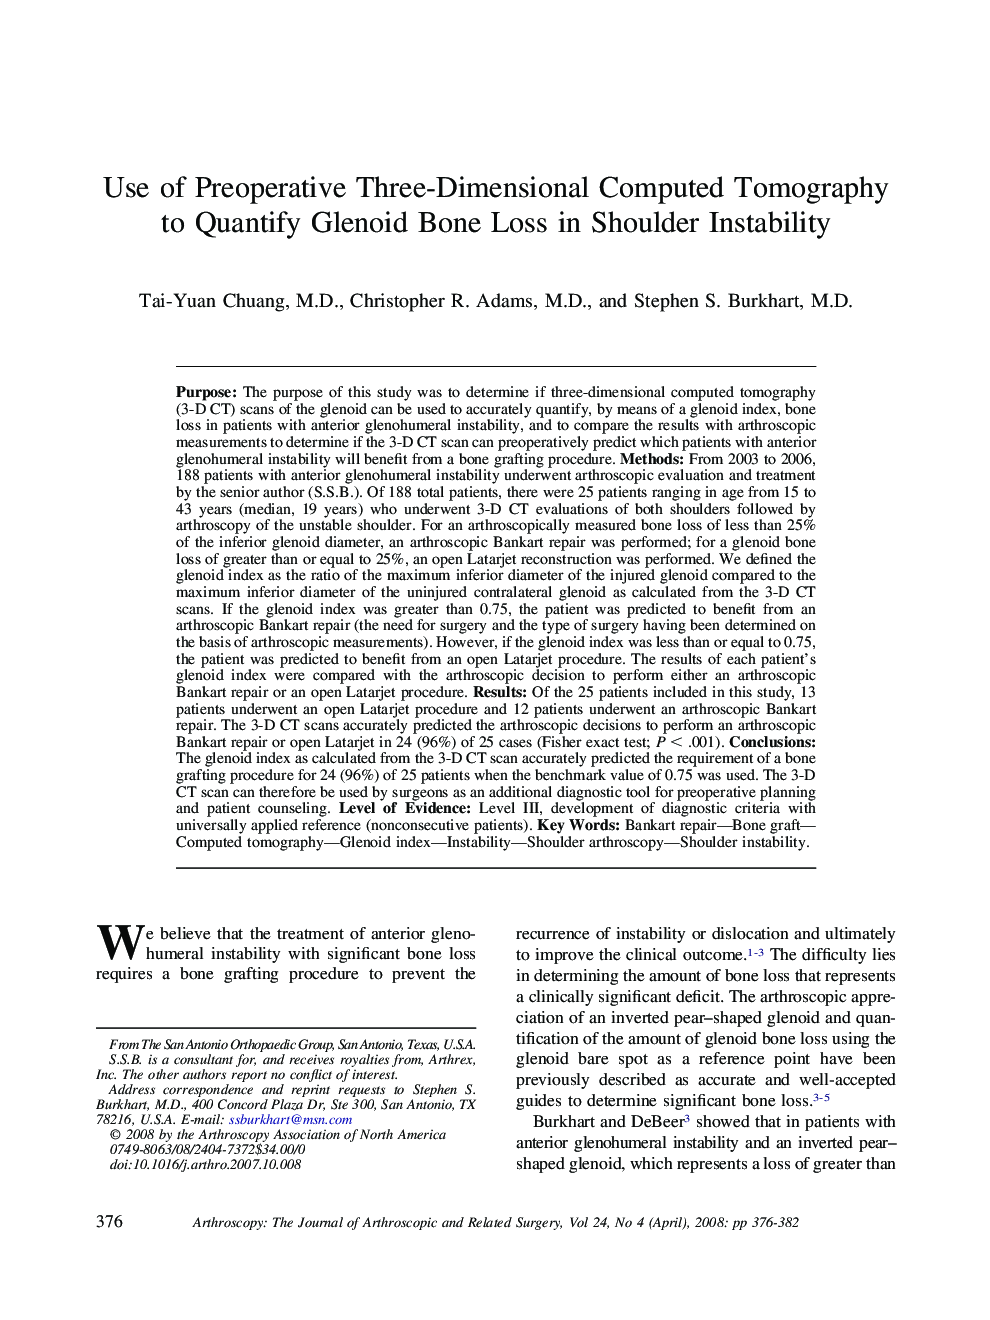 Use of Preoperative Three-Dimensional Computed Tomography to Quantify Glenoid Bone Loss in Shoulder Instability 